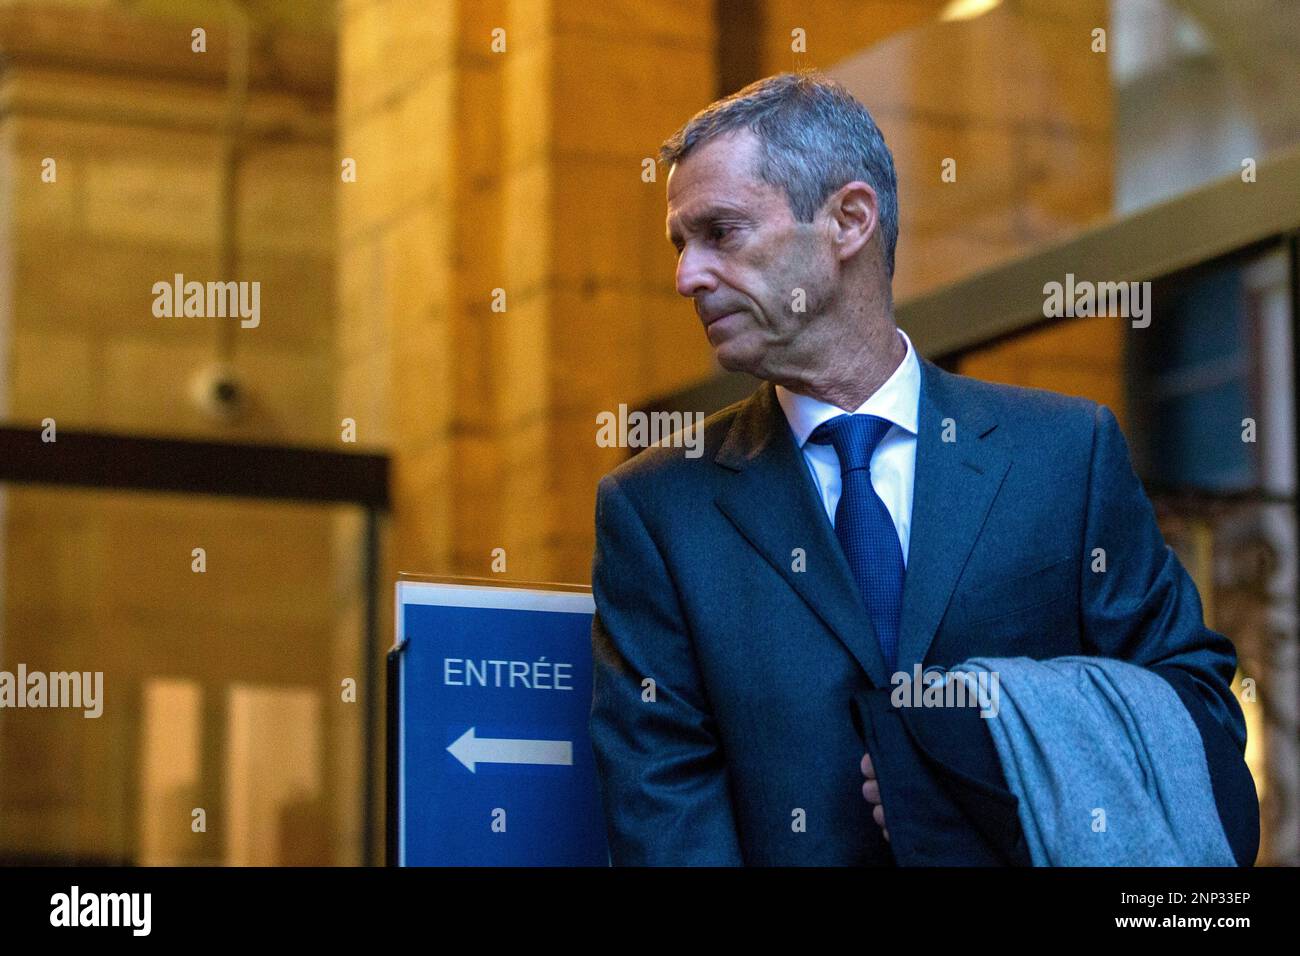 Israeli business man Beny Steinmetz arrives to a courthouse in Geneva,  Switzerland, Monday, Jan. 11, 2021. Israeli diamond magnate Beny Steinmetz  goes on trial in Geneva on charges of corruption and forging